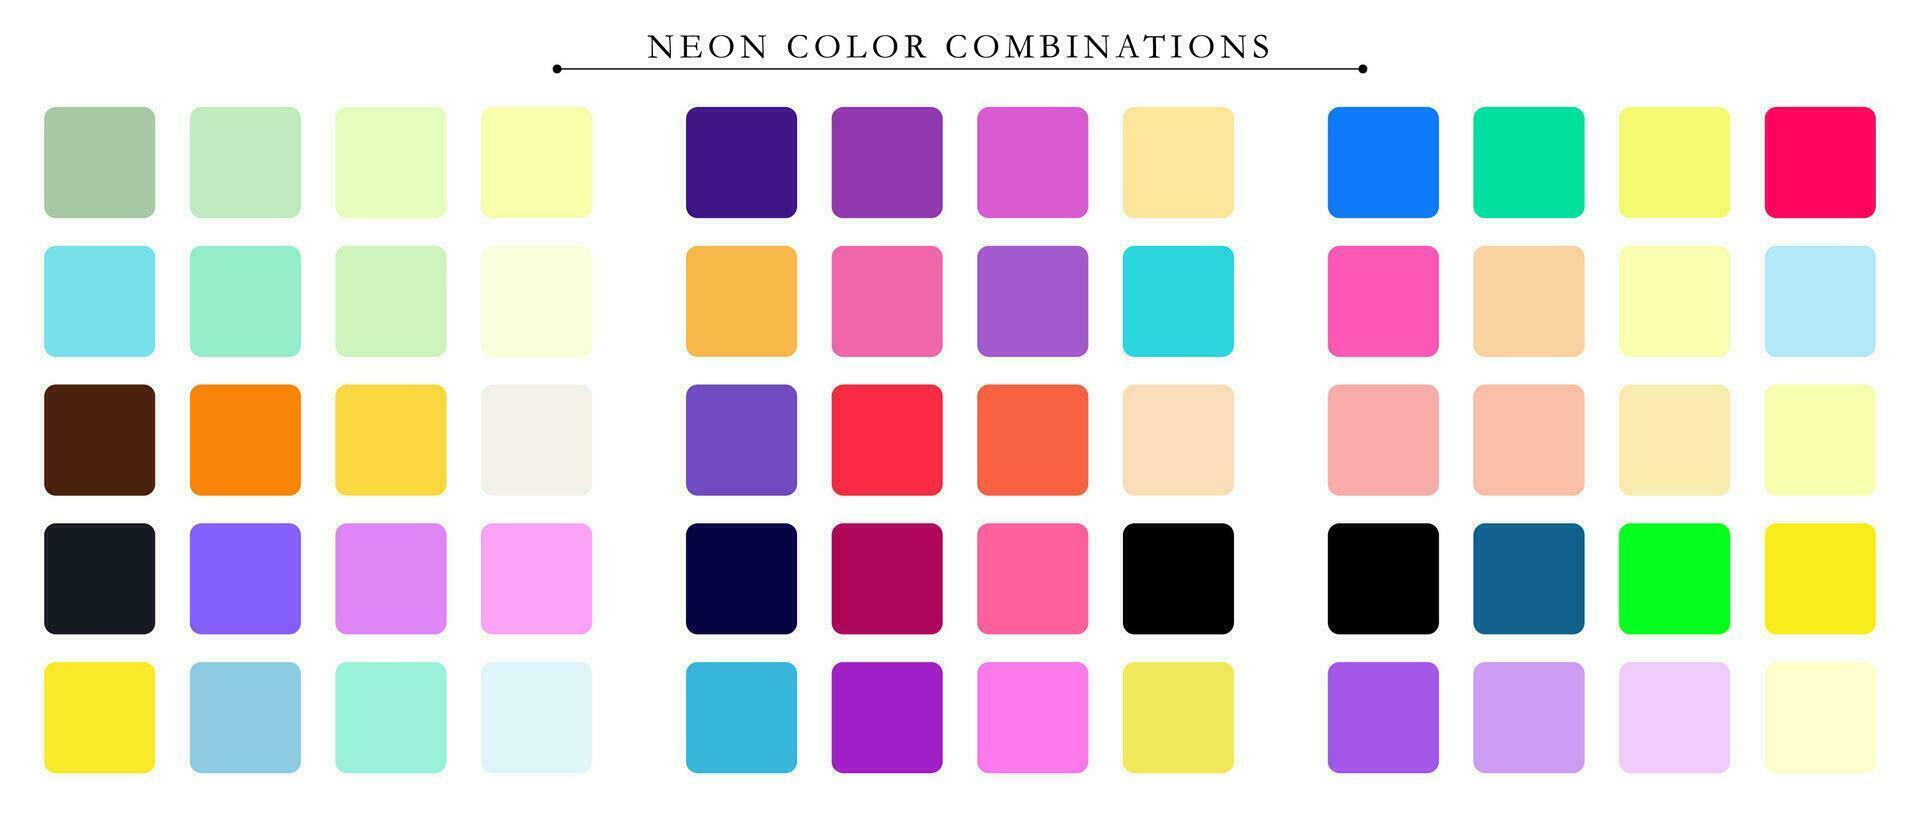 Neon palette. Trend color pallete guide template. An example of a color palette. Forecast of the future color trend. Match color combinations. Vector graphics. Eps 10.